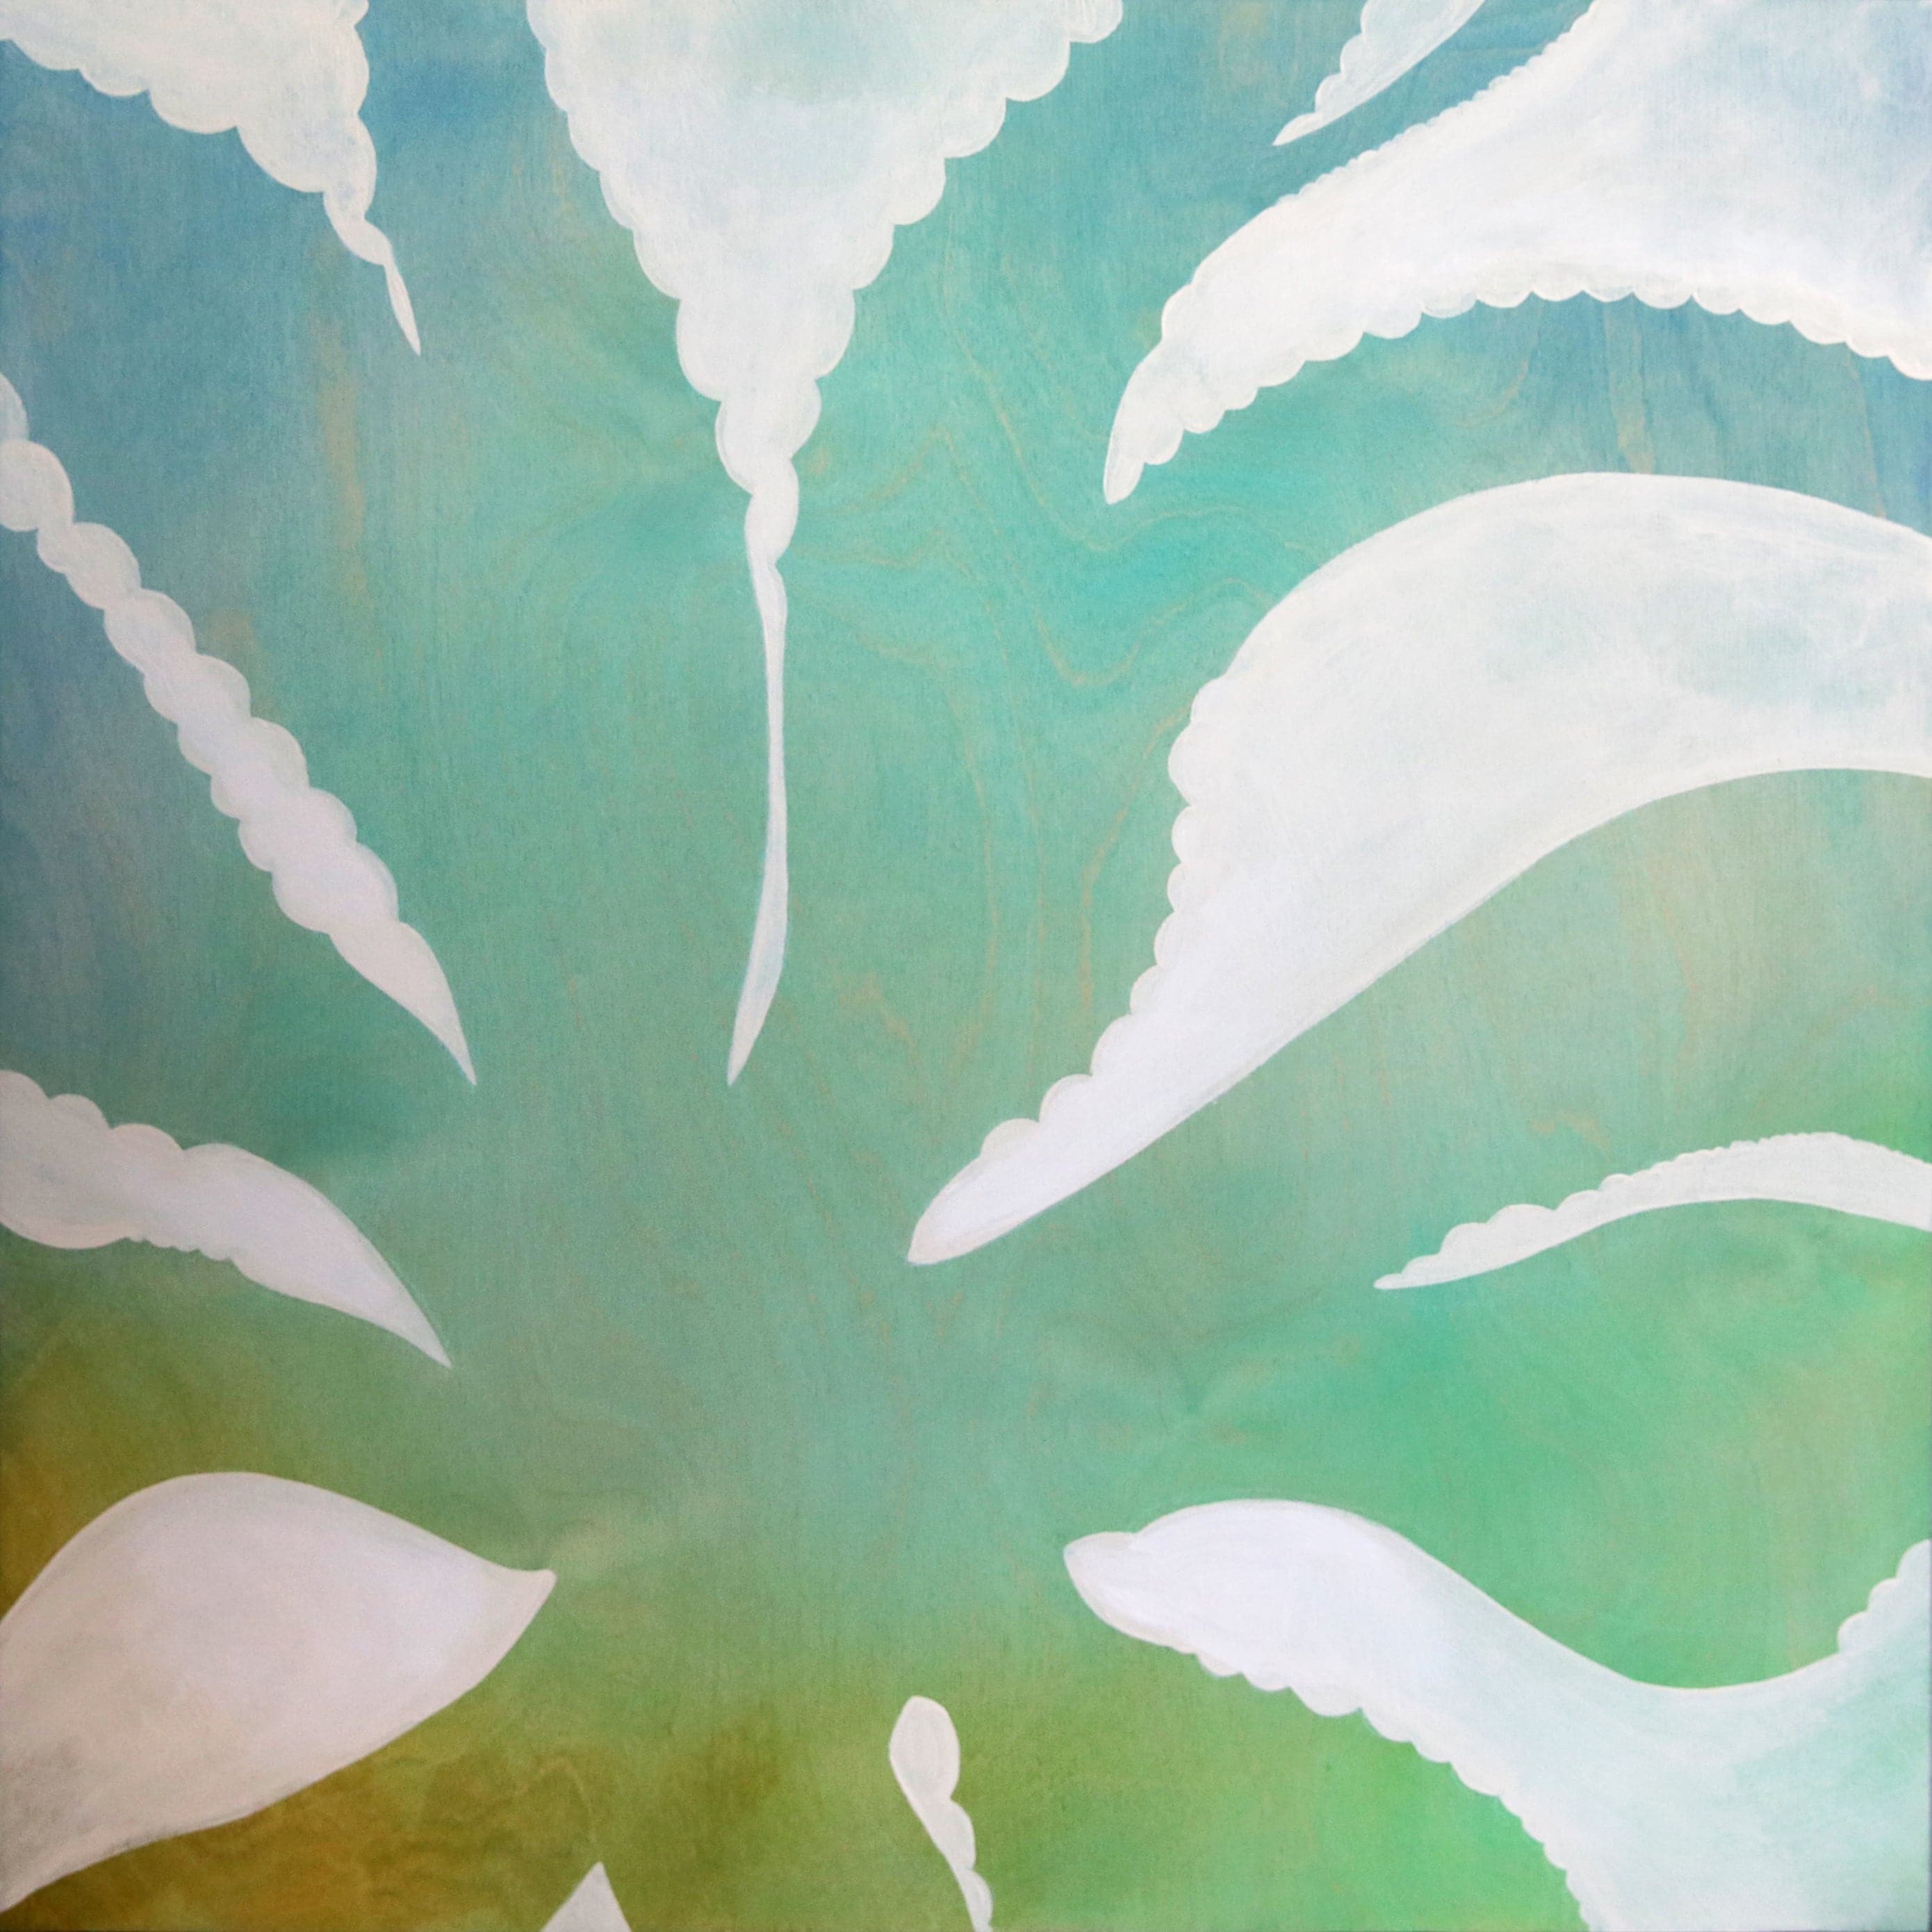 Original painting of a silhouetted rigged leaf aloe vera plant in yellow, green, blue, ombre colors with wood grain texture.